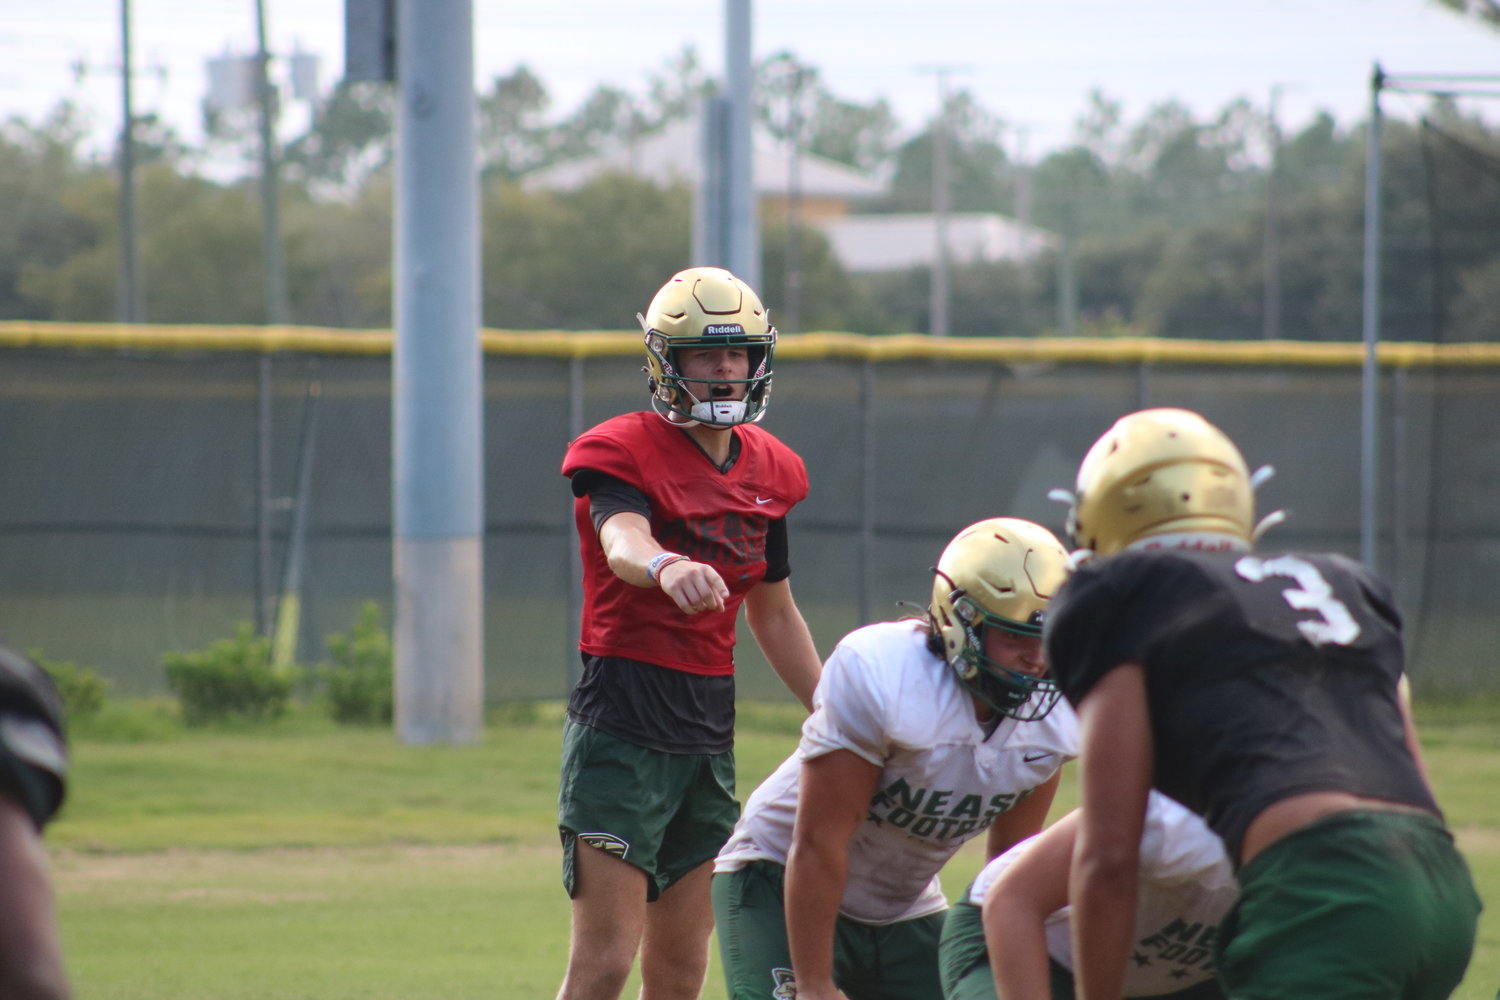 Senior quarterback and University of Florida commit Marcus Stokes is the orchestrator of the Nease offense.